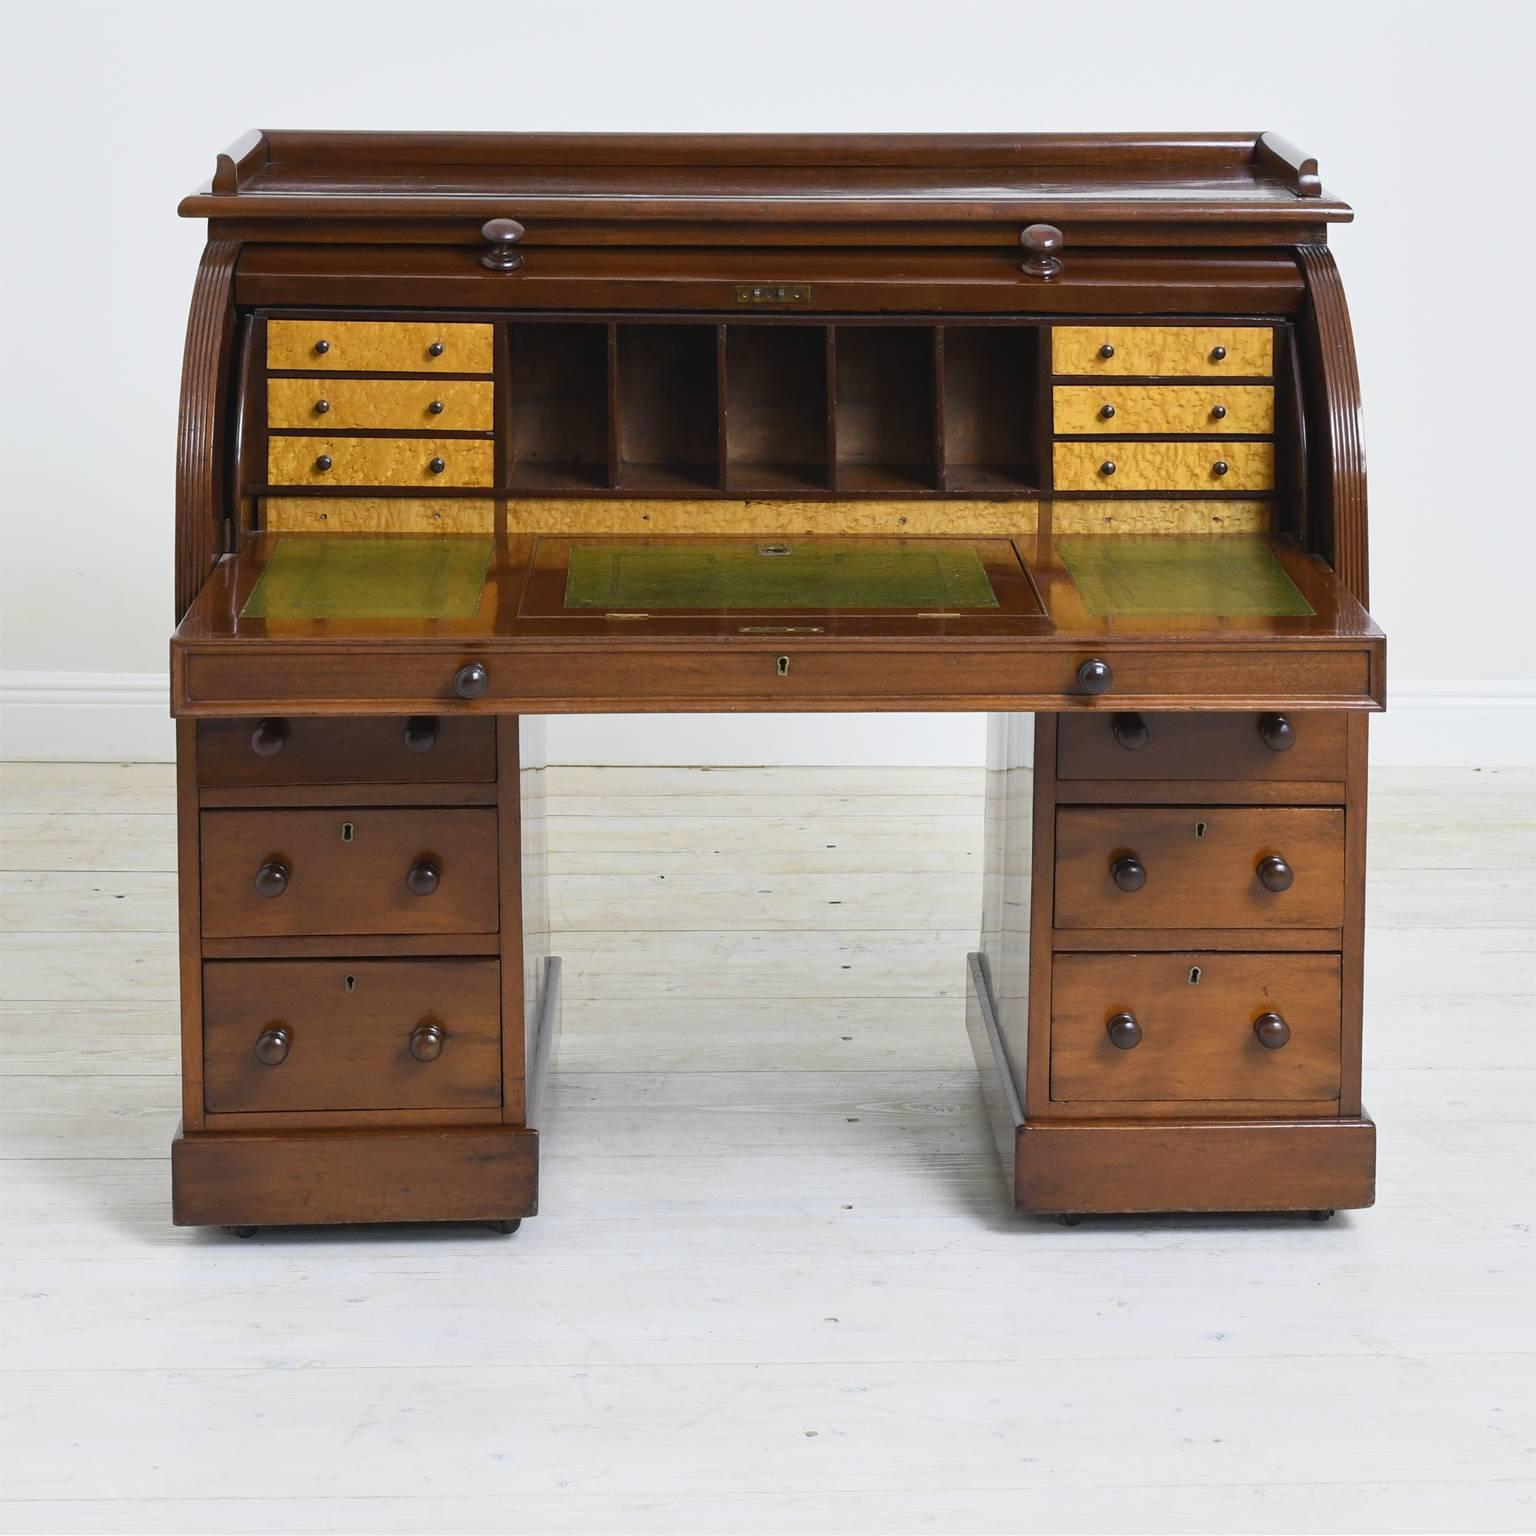 A beautiful and practical working desk in mahogany on two pedestal bases offering six storage drawers and with pull-out desk drawer and cylinder top opening to a series of small interior drawers and open cubbies for letters and bills. Features